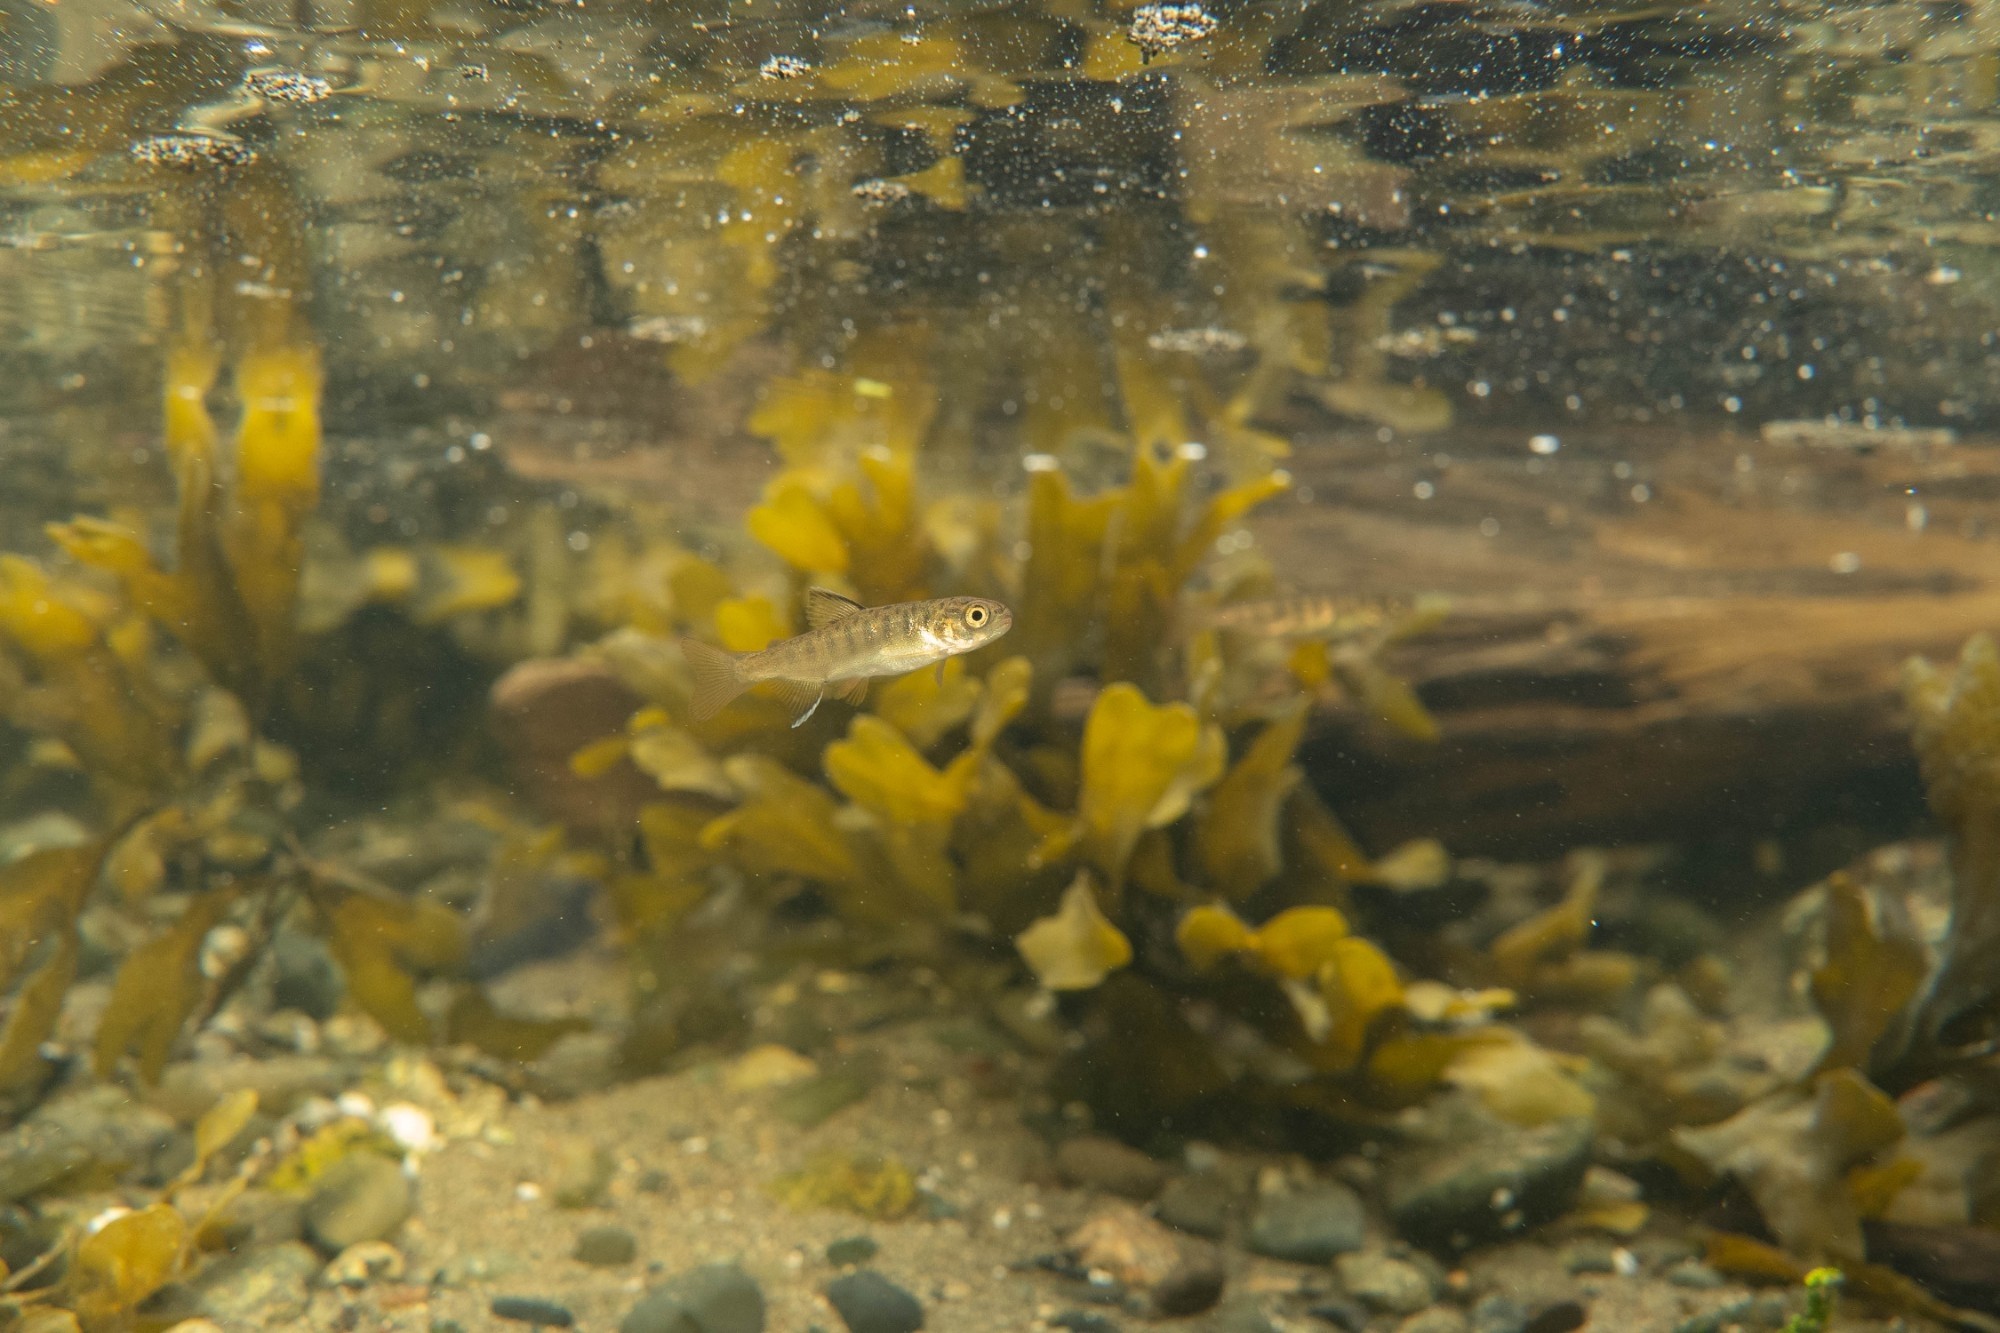 Juvenile salmon migration timing responds unpredictably to climate change -  Faculty of Science - Simon Fraser University